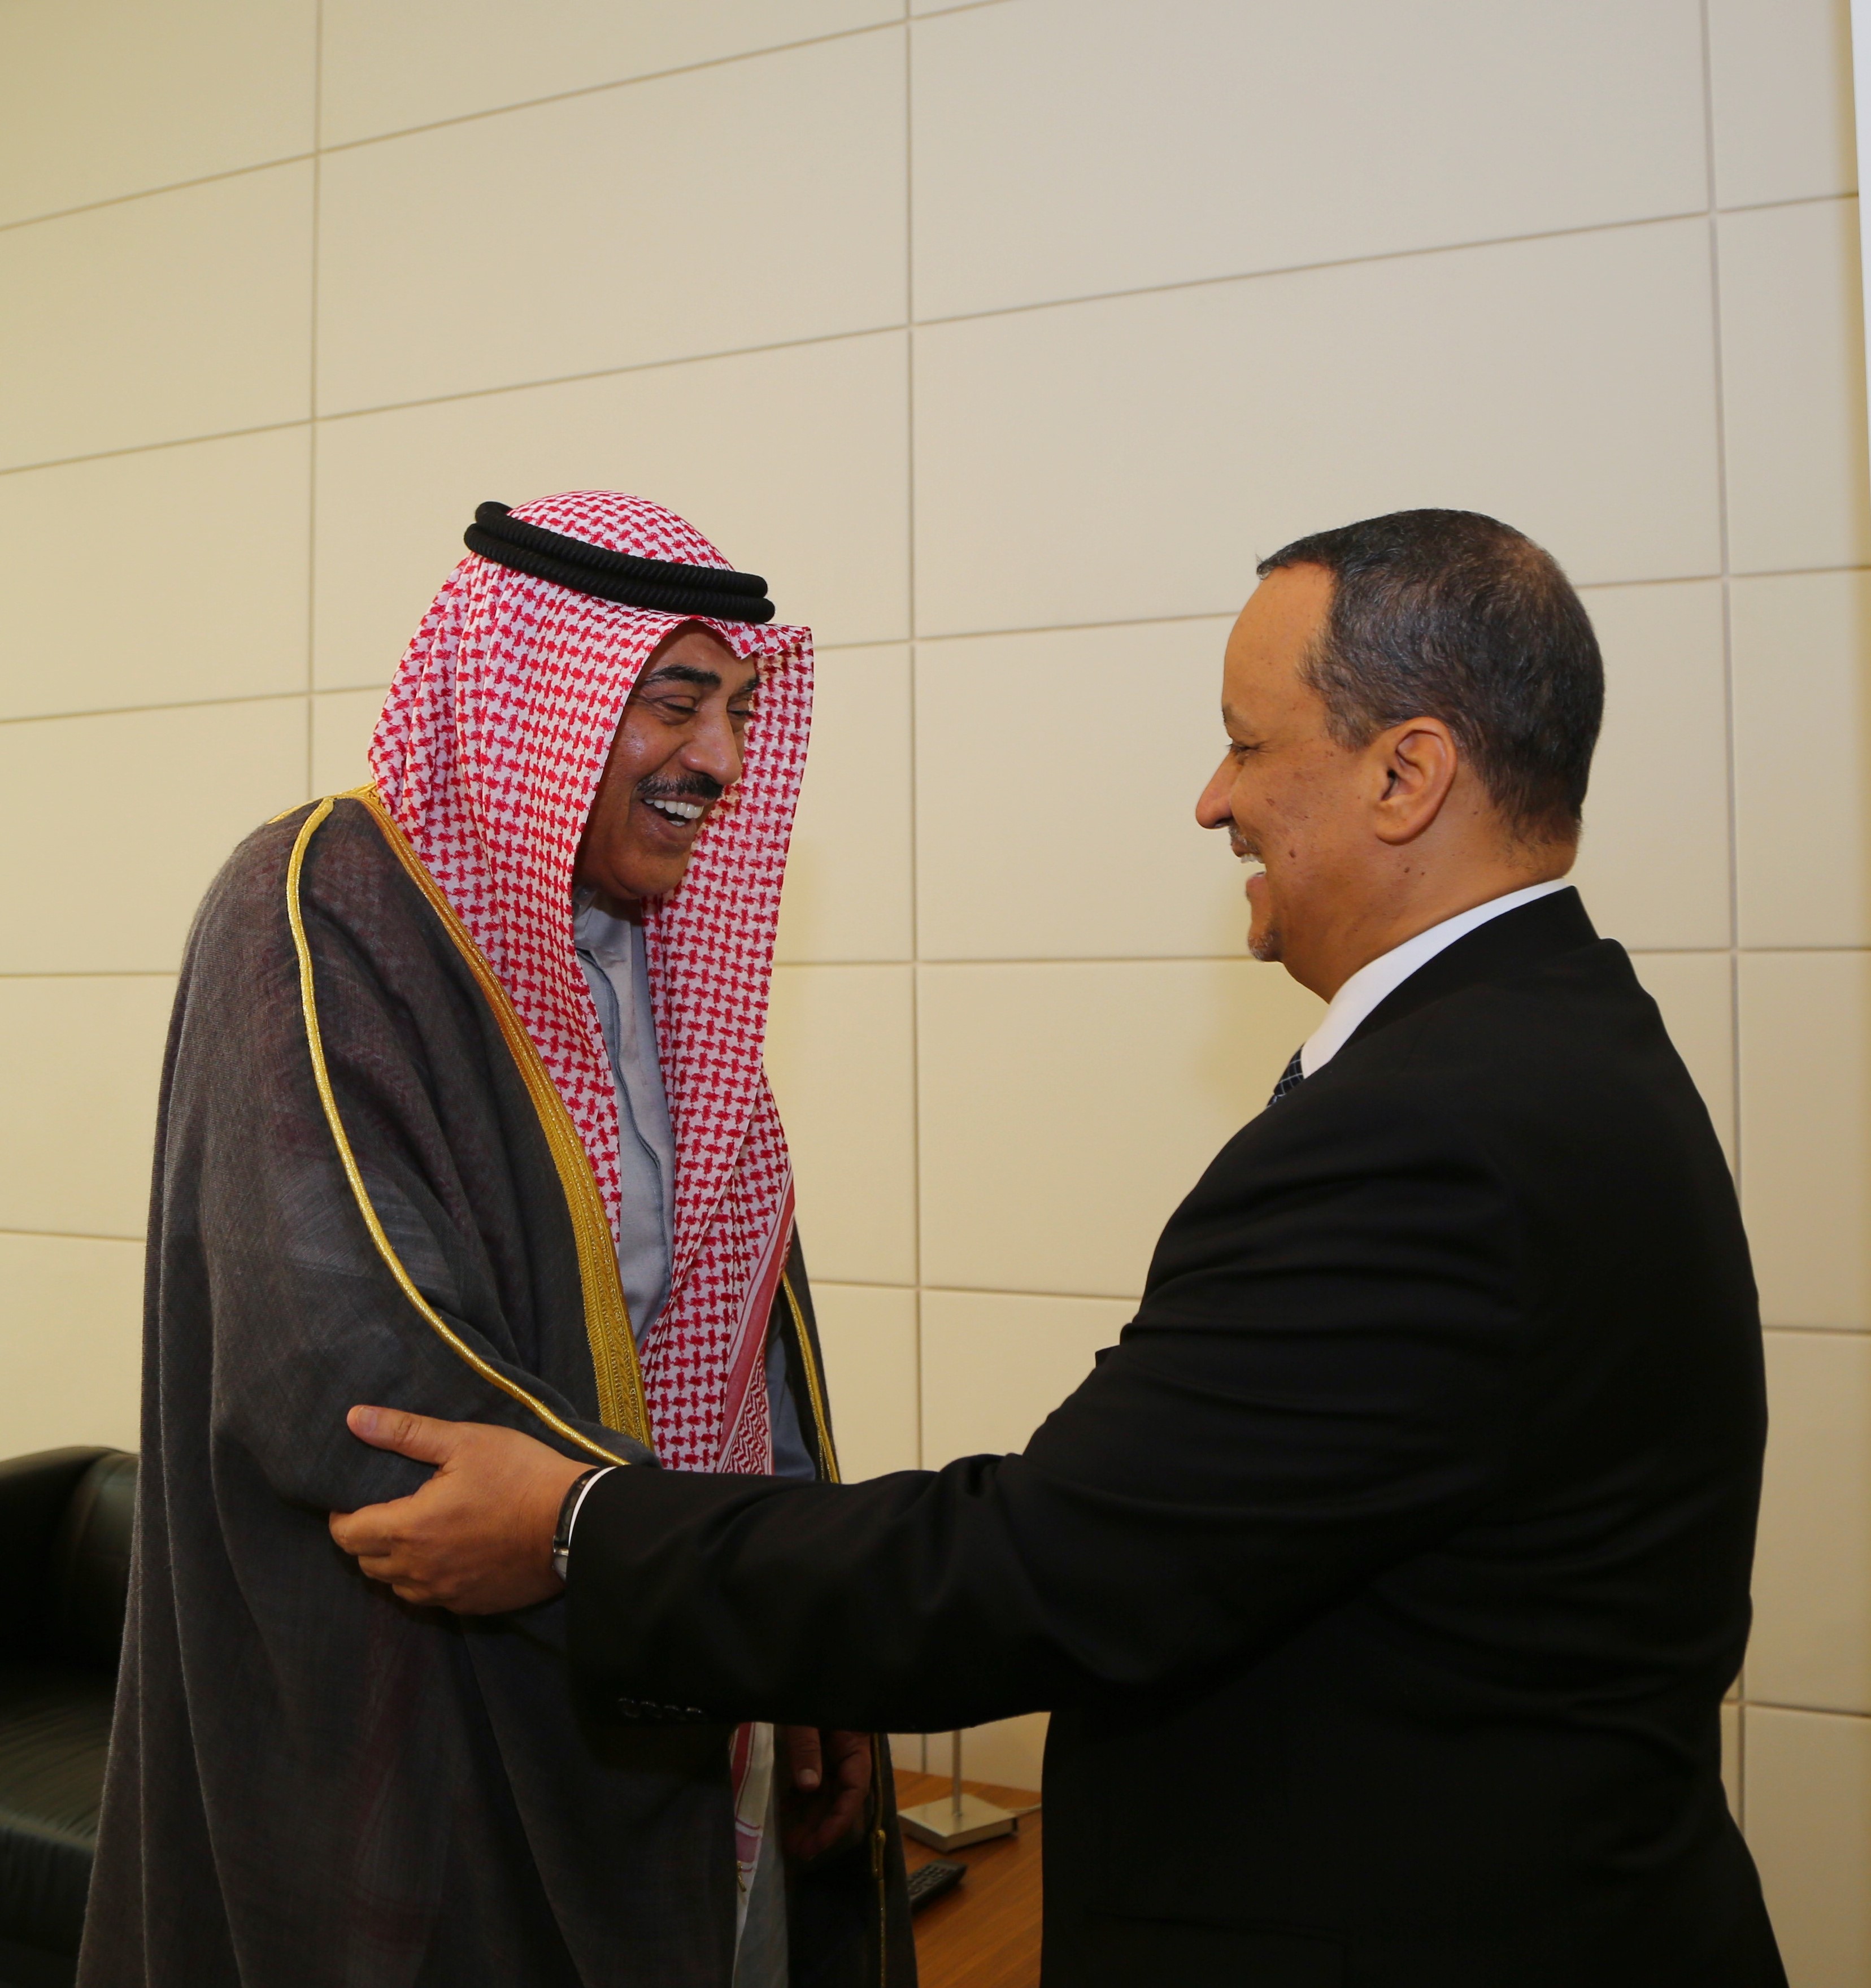 Kuwait's Foreign Minister met his Mauritanian counterpart